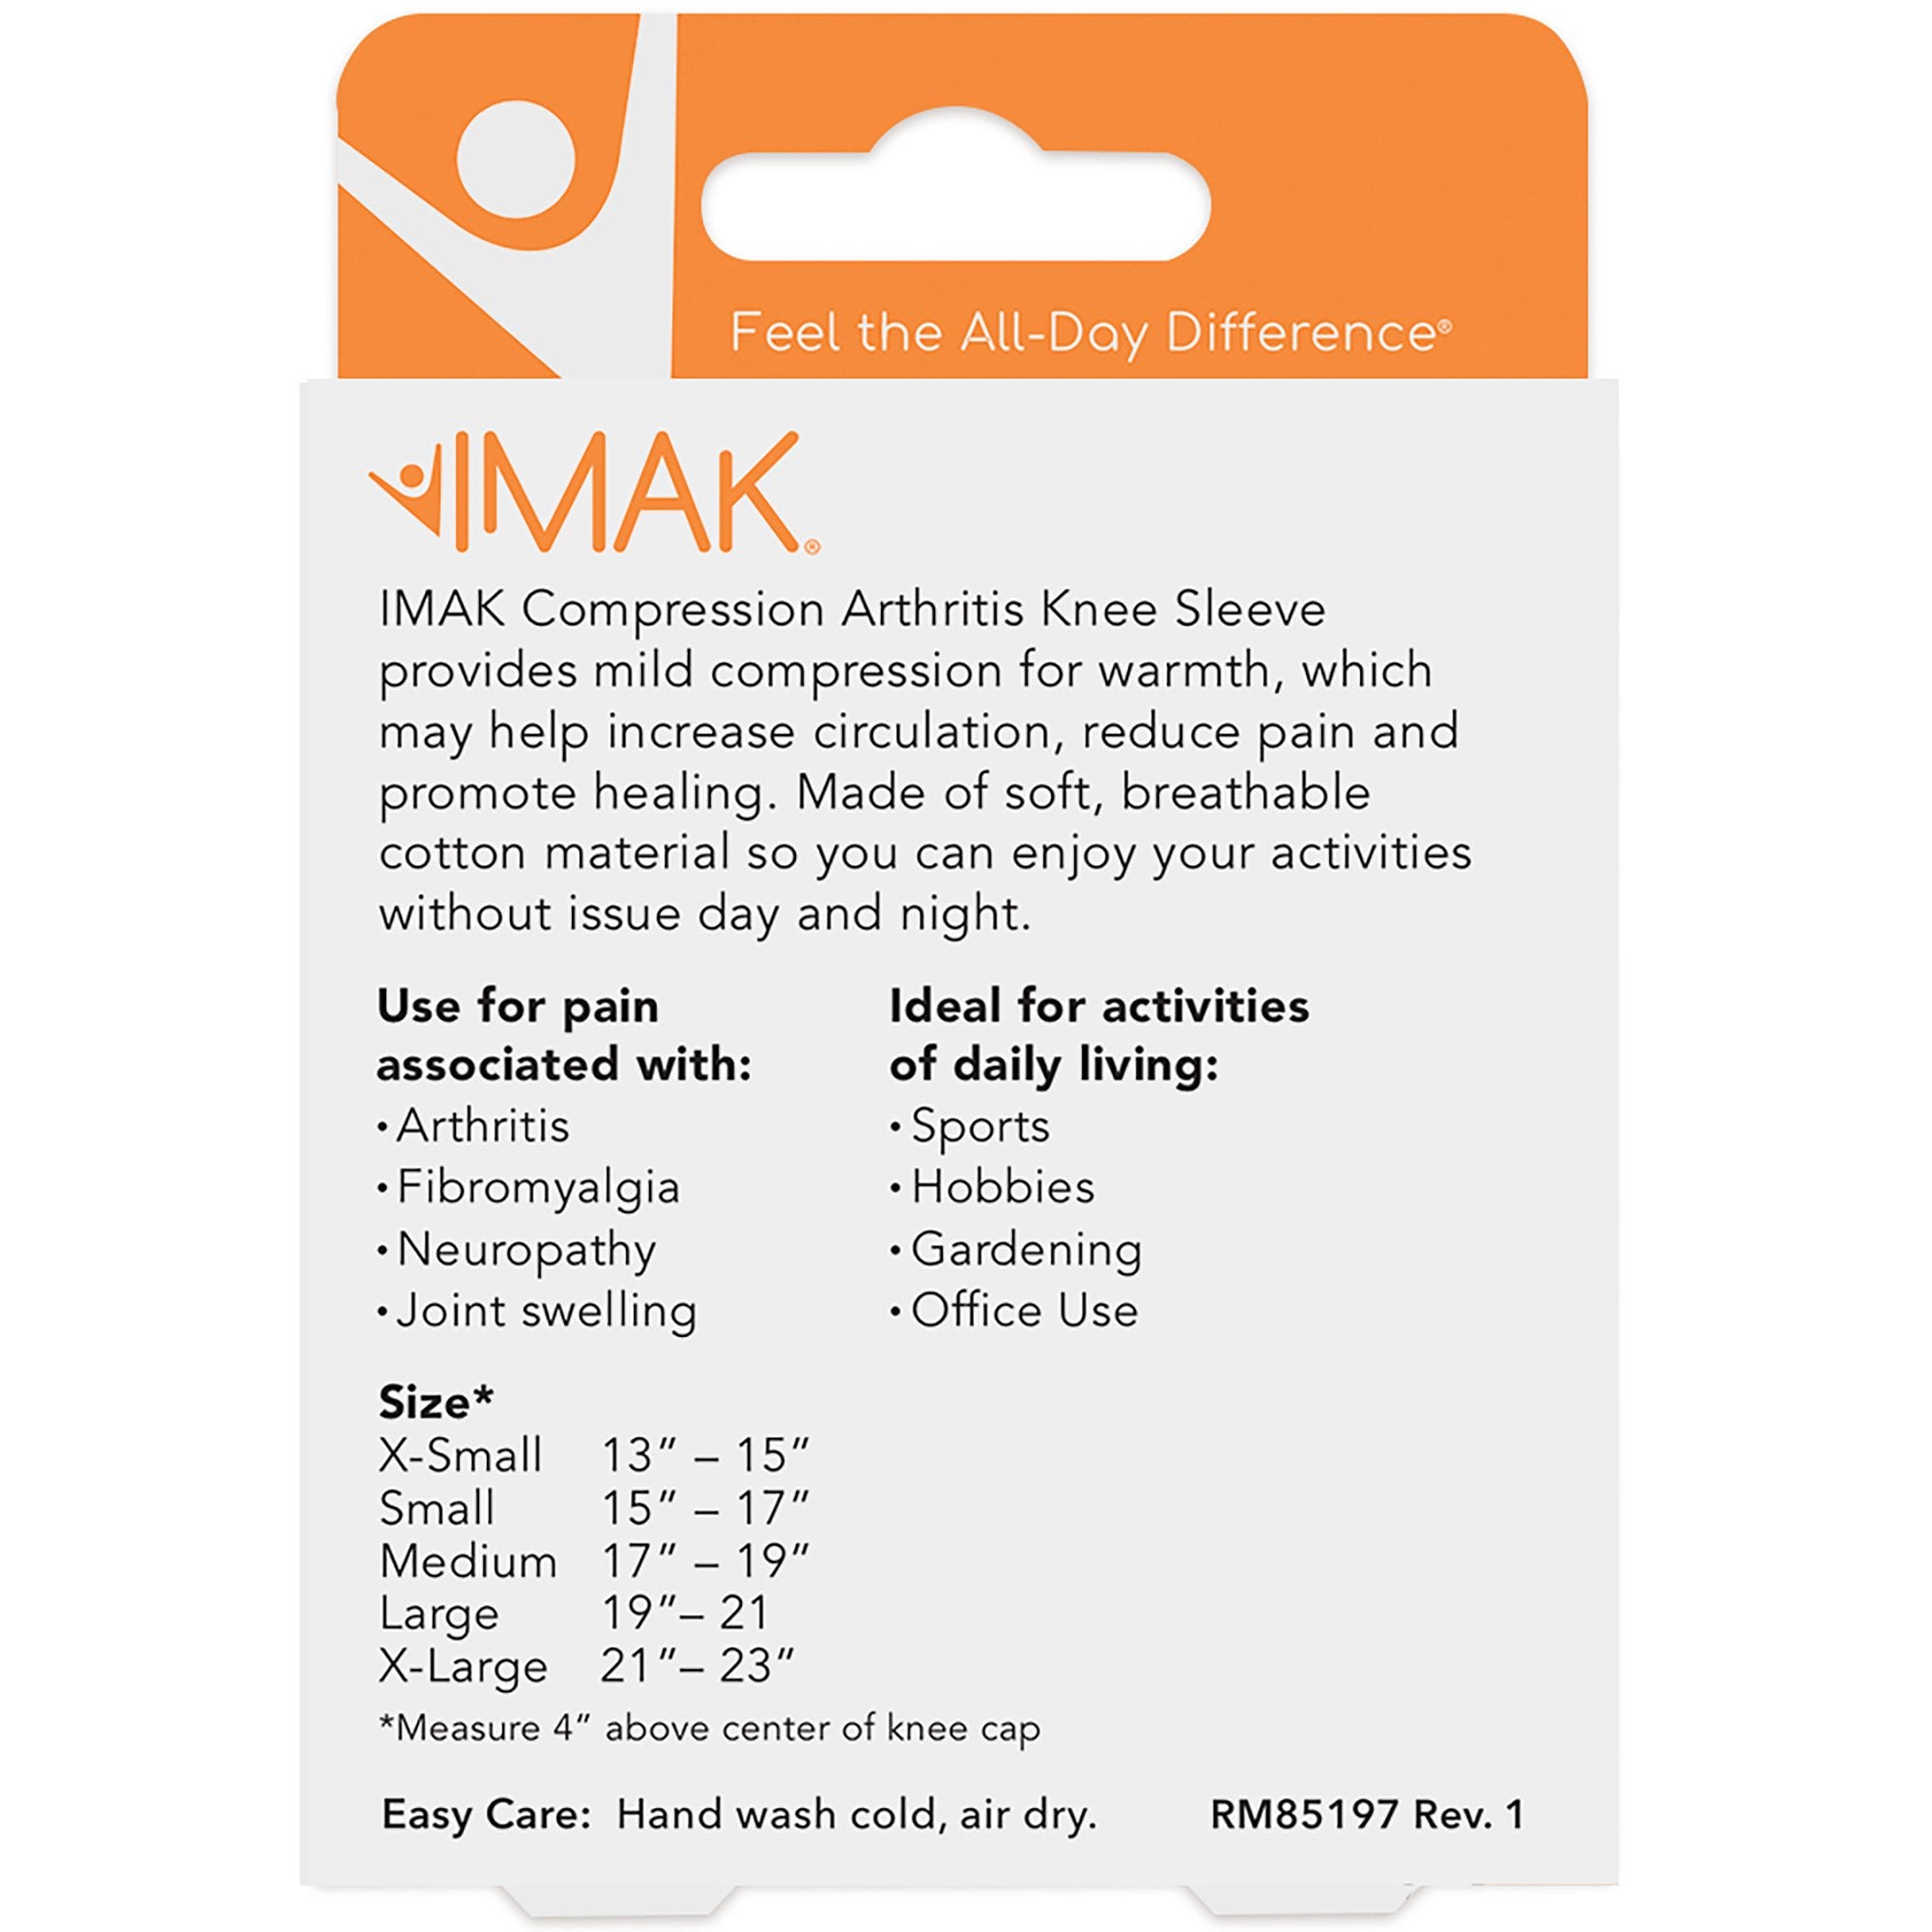 Knee Support Imak® Feel the All-Day Difference® X-Large Pull-On 21 to 23 Inch Leg Circumference Left or Right Knee